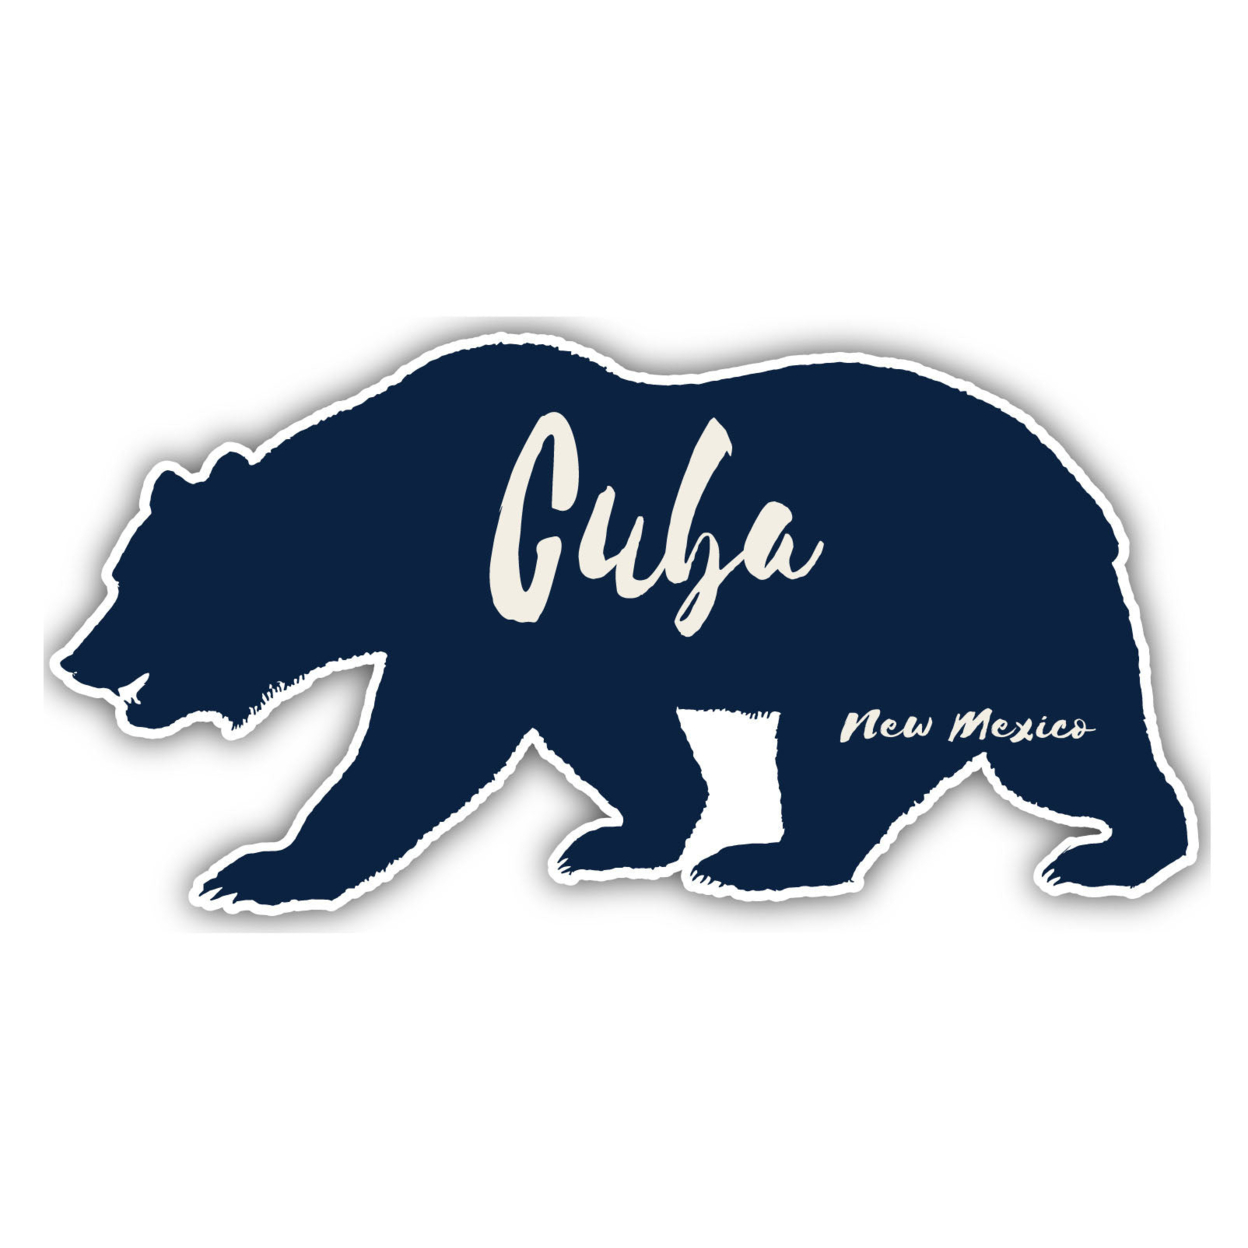 Cuba New Mexico Souvenir Decorative Stickers (Choose Theme And Size) - 4-Pack, 4-Inch, Bear